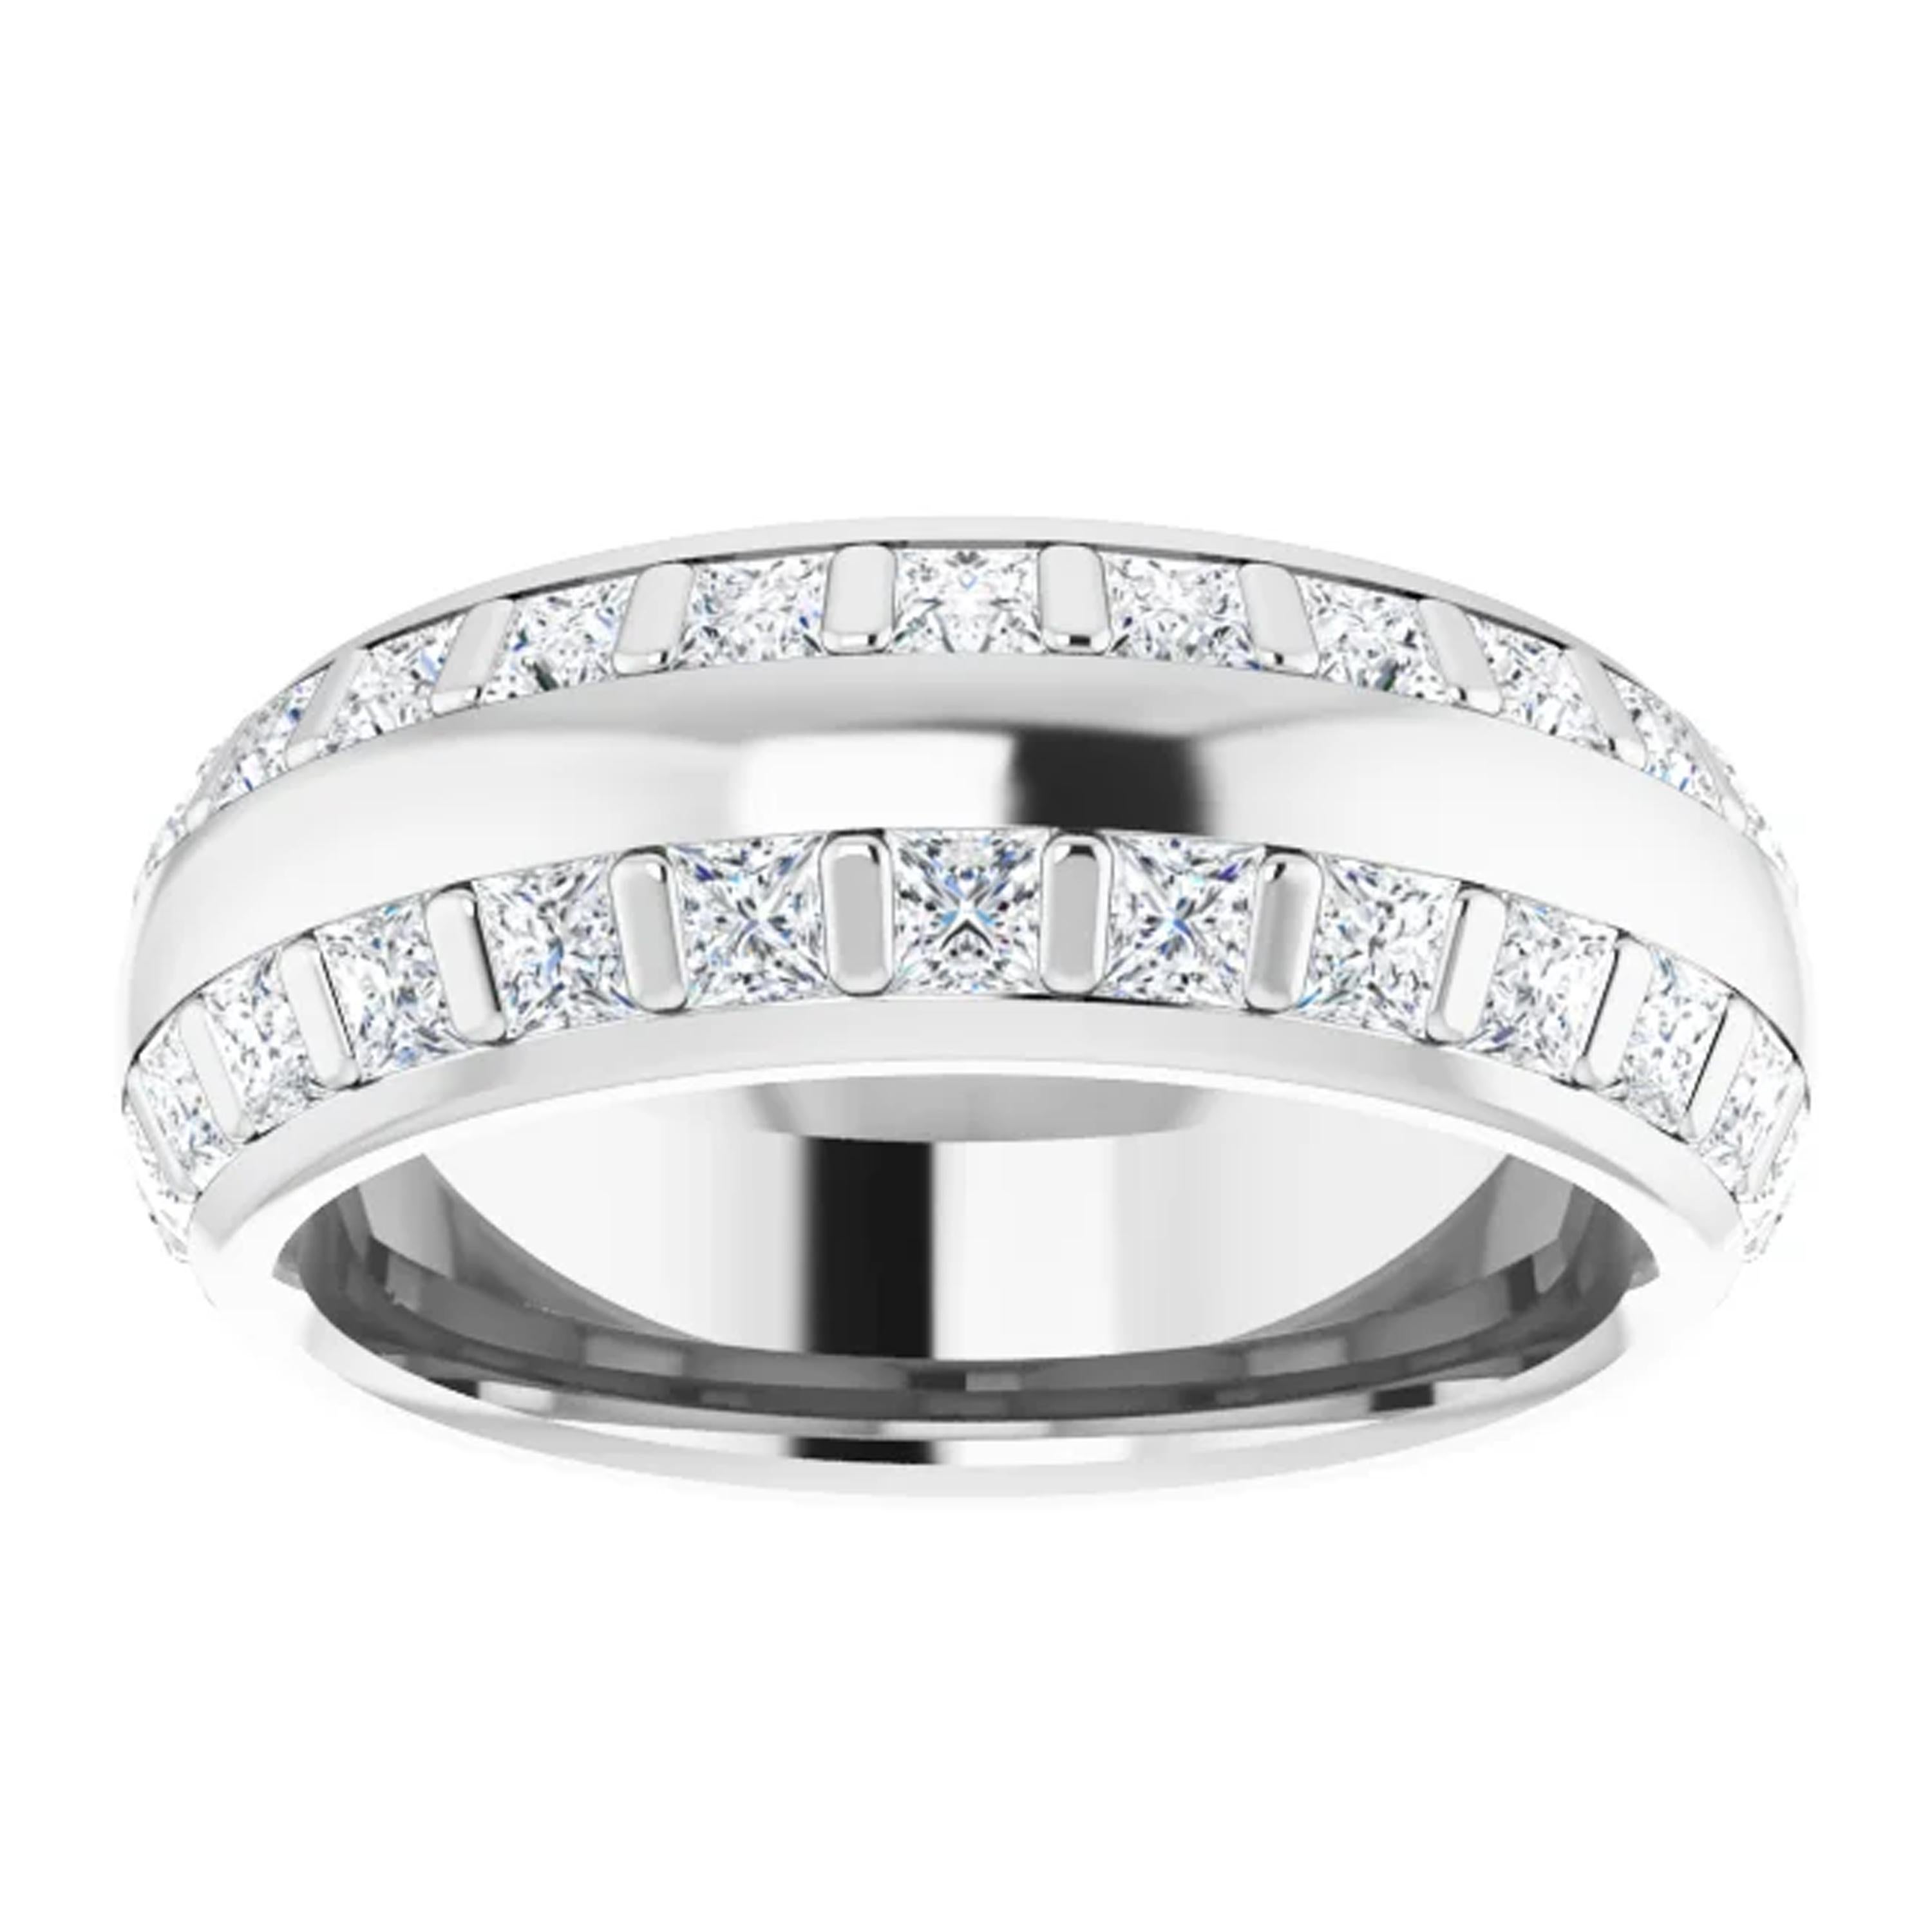 Dainty and unique, princess cut natural diamonds full of life line the shank of this double row eternity band. Handcrafted meticulously in 18k white gold and finished with a high polished rhodium plating, this eternity band is made for size 7. This